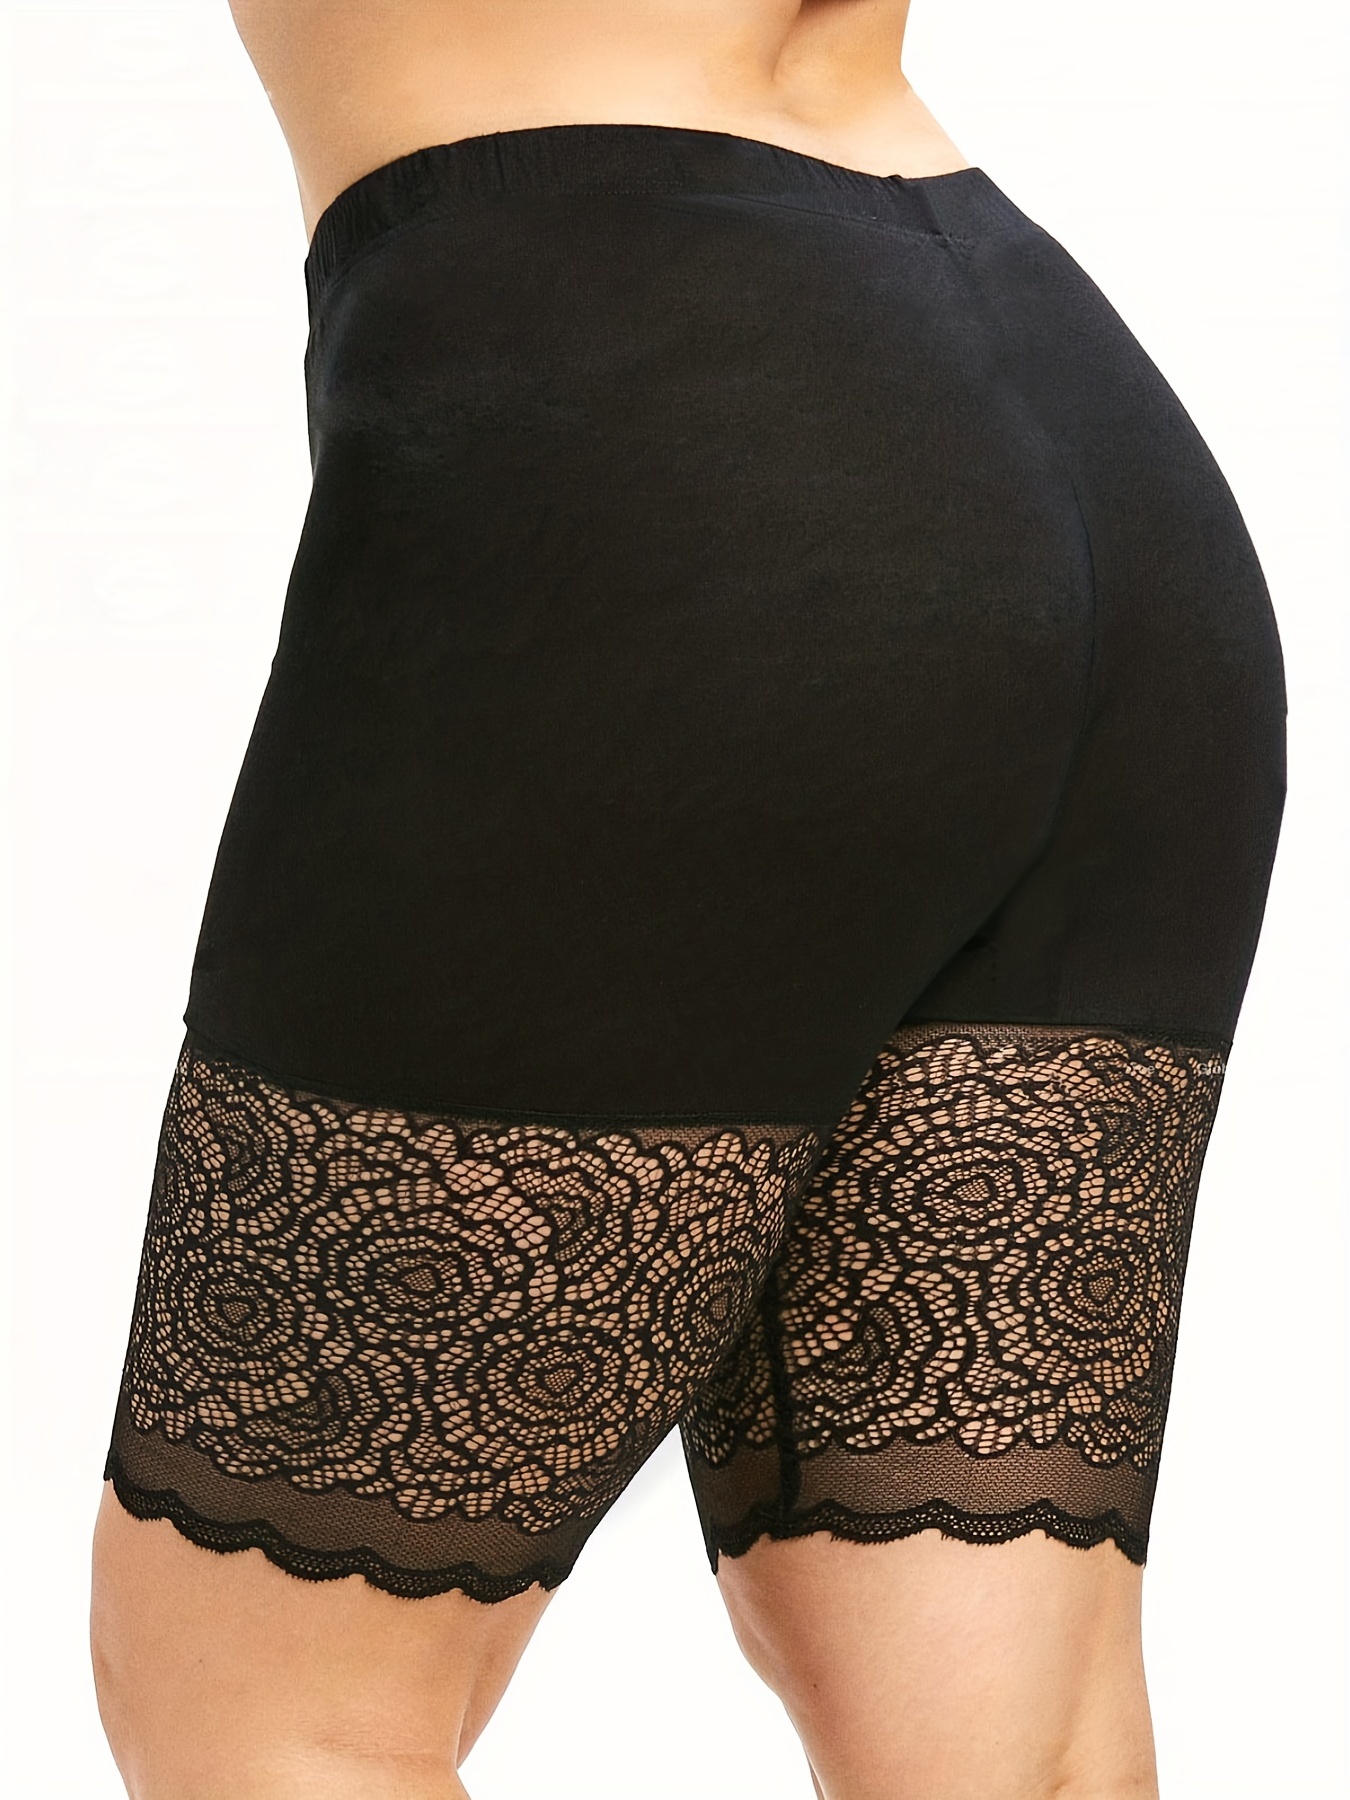 New Womens Black Stretchy Cycling Short, 3/4 Plain And Lace Trim